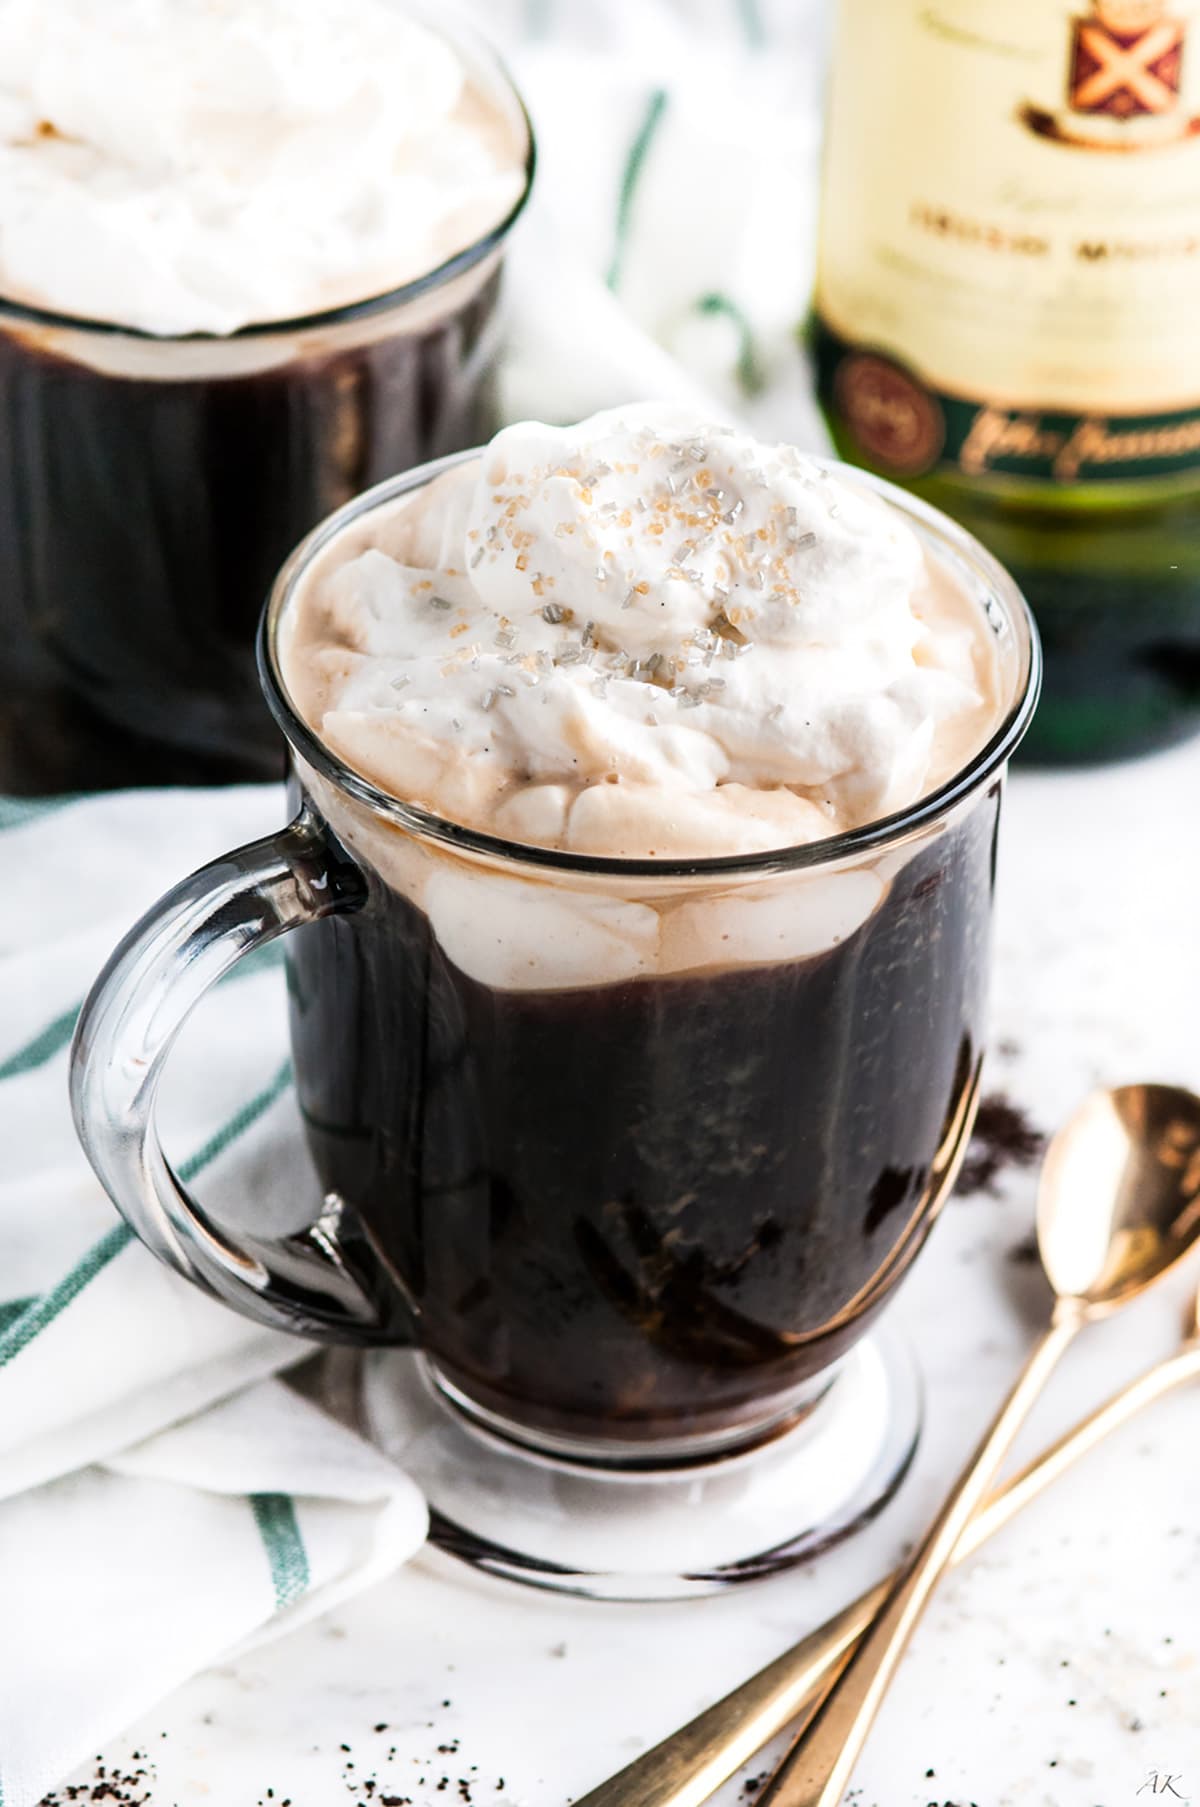 Irish Coffee with Baileys Whipped Cream in glass mugs with gold spoons with Jameson whiskey bottle in the background